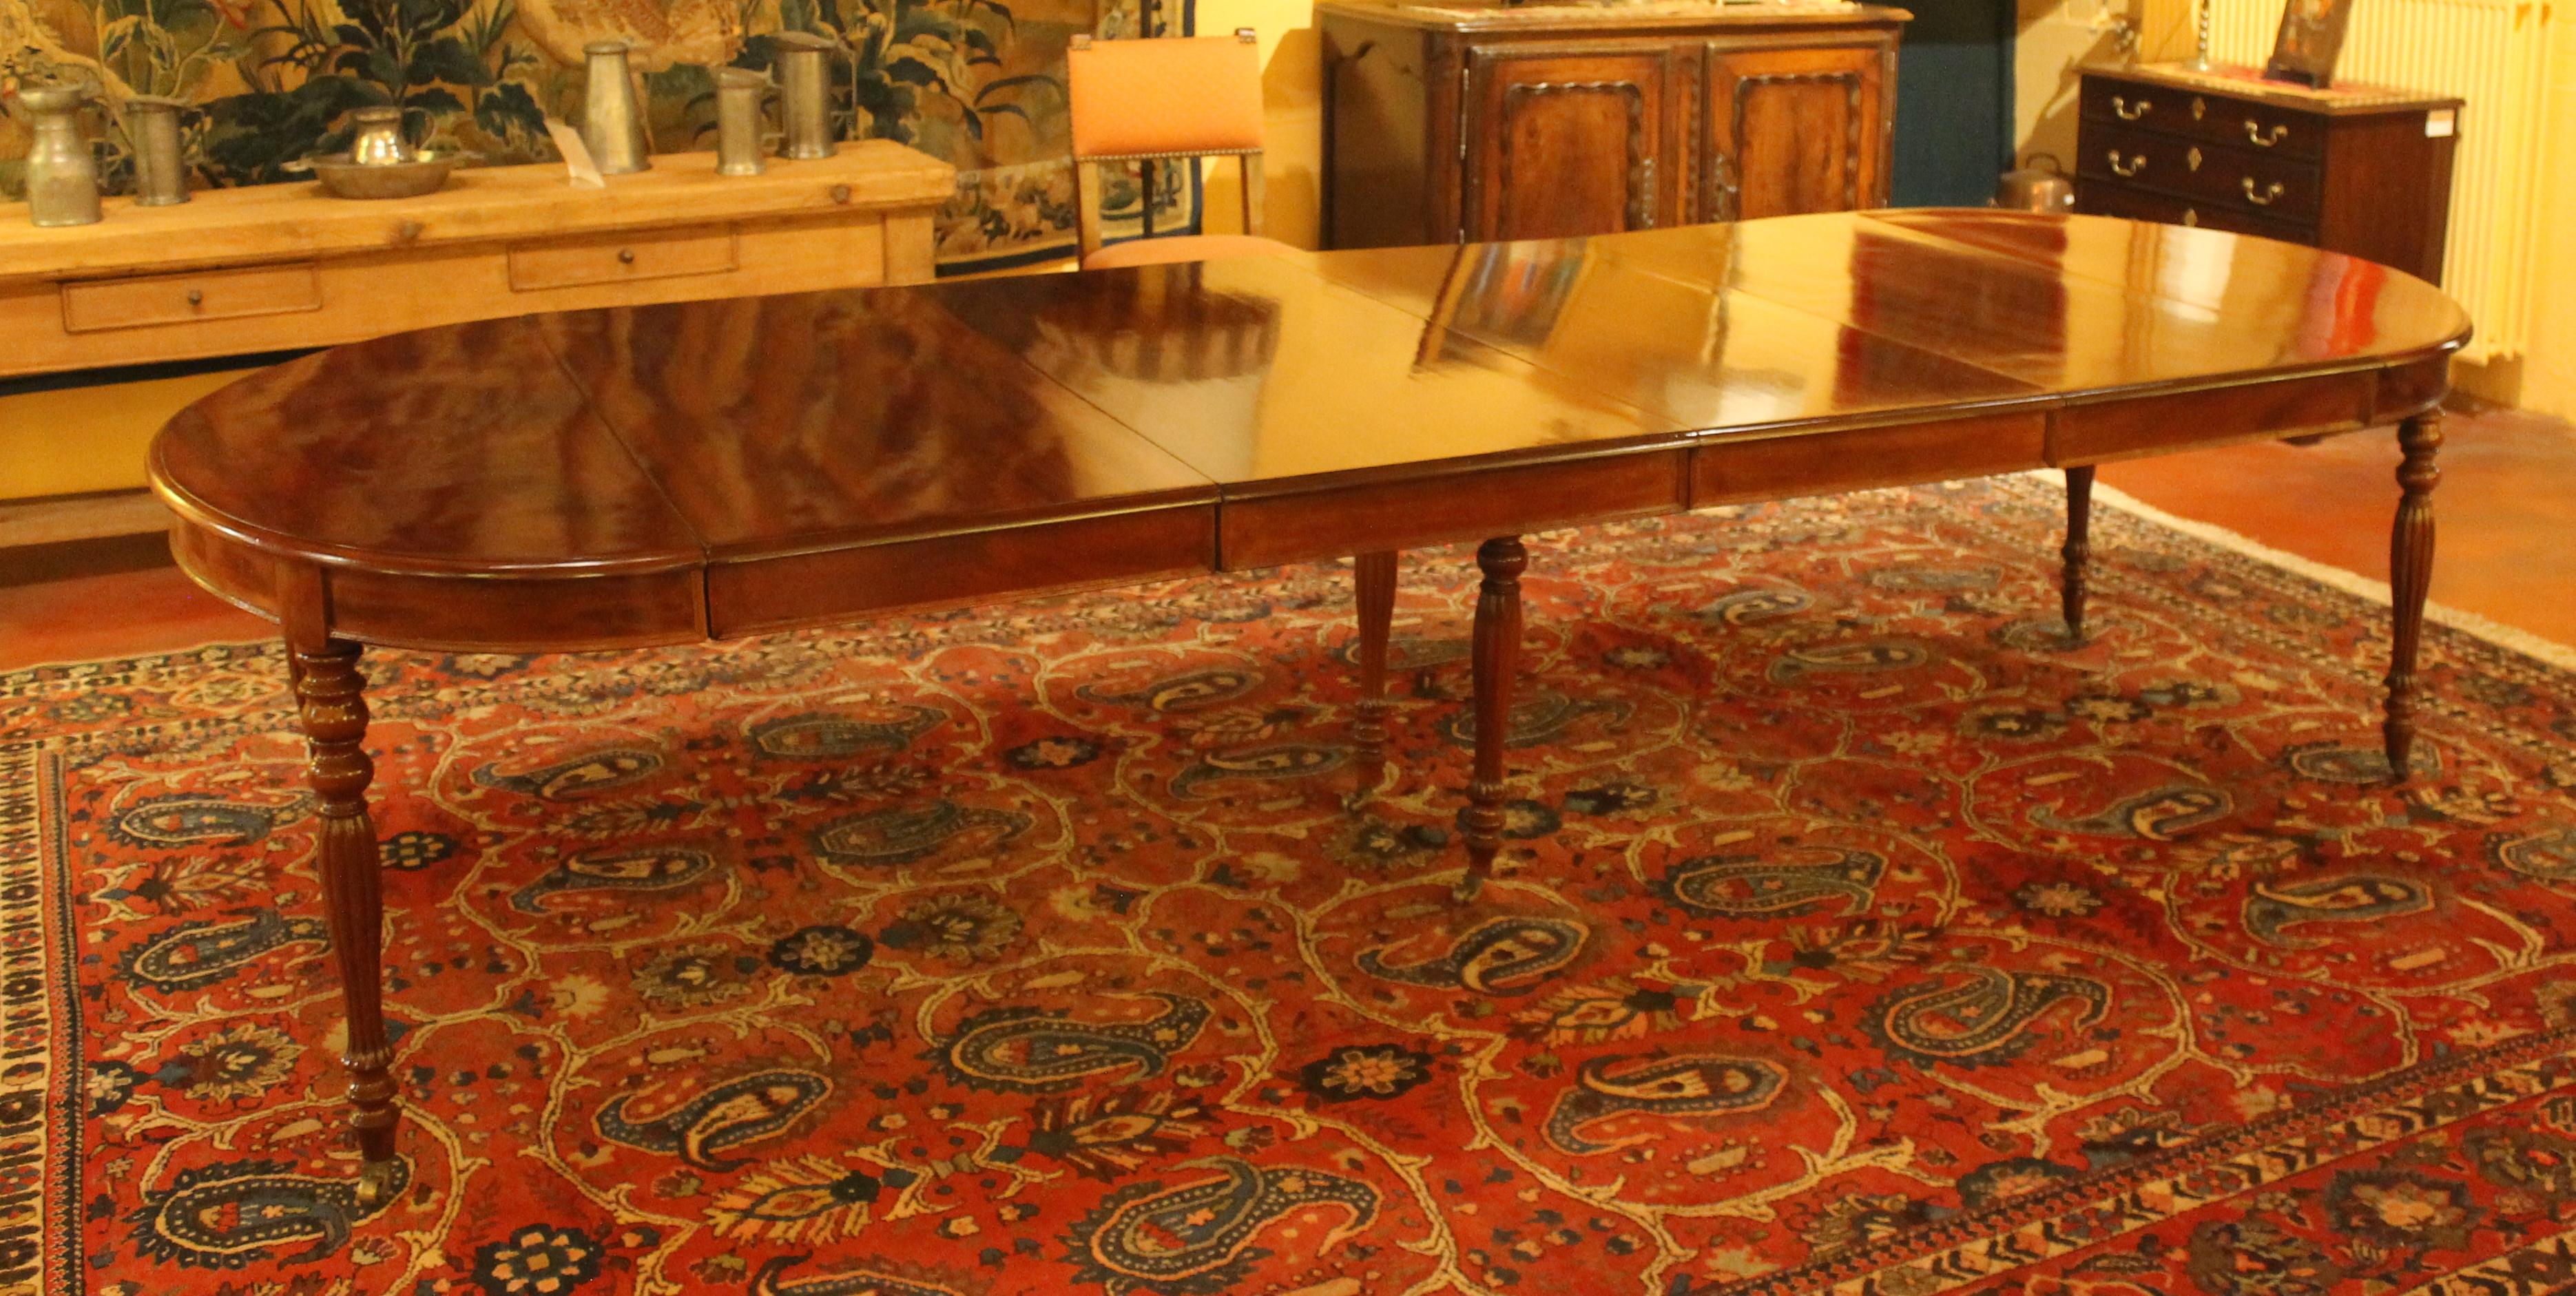 Superb large mahogany extandable table from the 19th century from France,
rare 6-foot extension table which has a frieze on the table as well as on its 4 extensions. Which gives it a superb line

The table as well as the 4 extensions are in solid